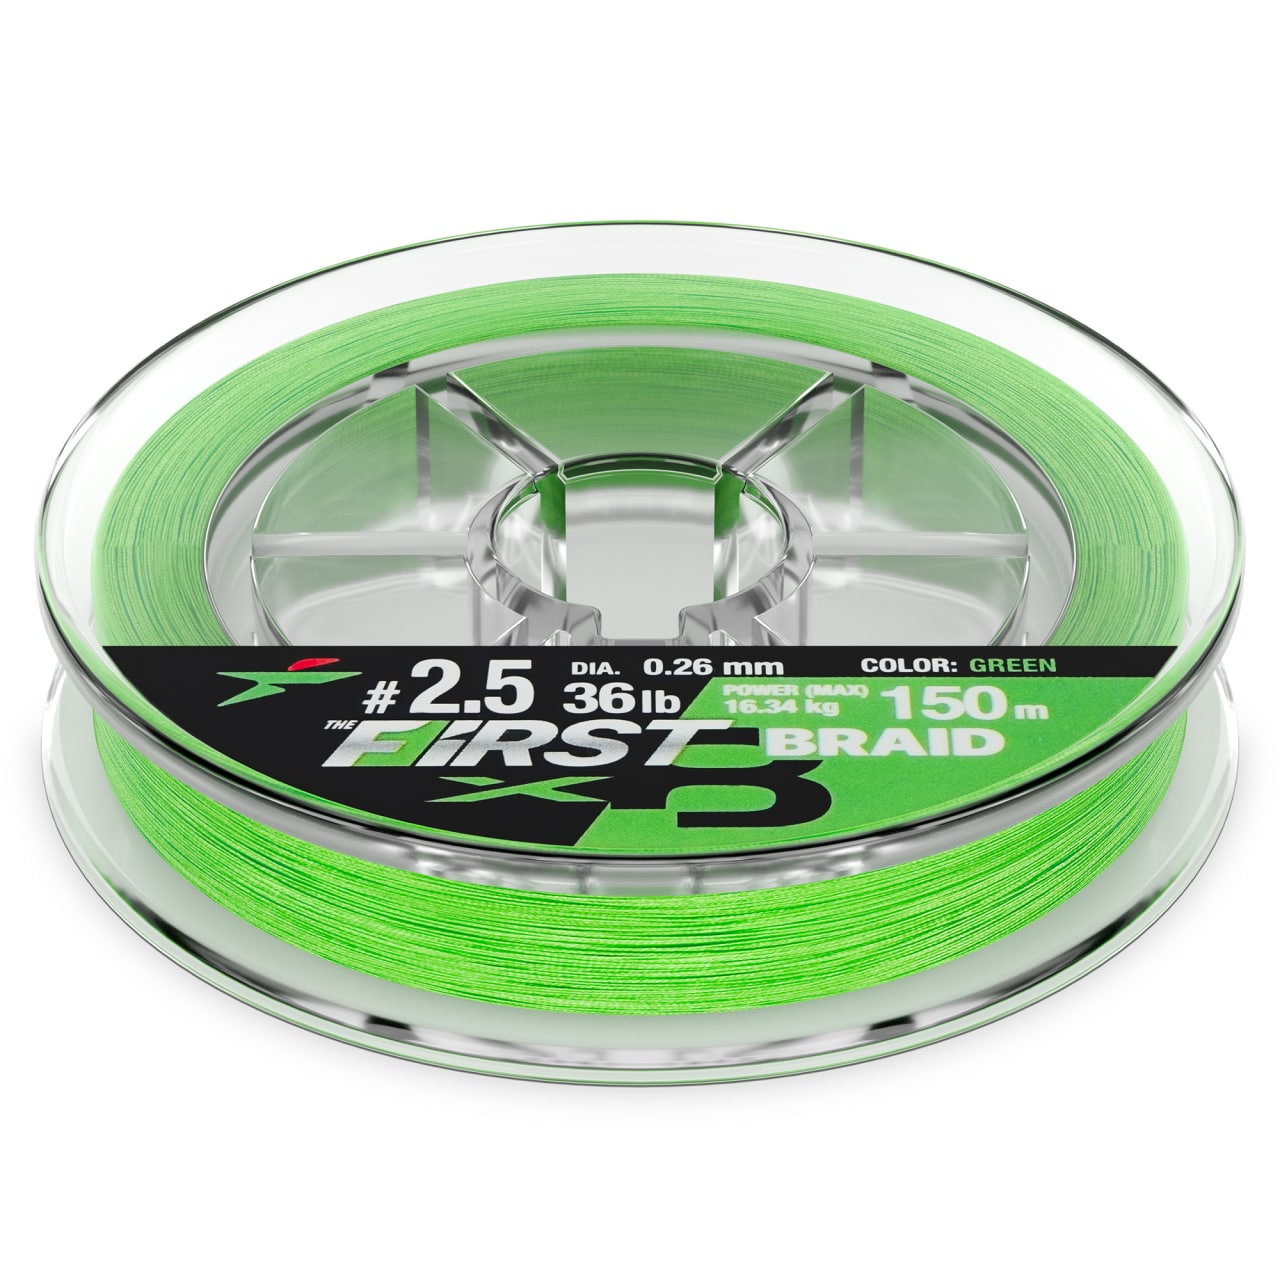 Fishing Braided Line Intech First Braid 8 Strand PE Fishing Line Braid 165  yds - Braided Fishing Line 10lb to 36lb Test Power - Superline Strong 